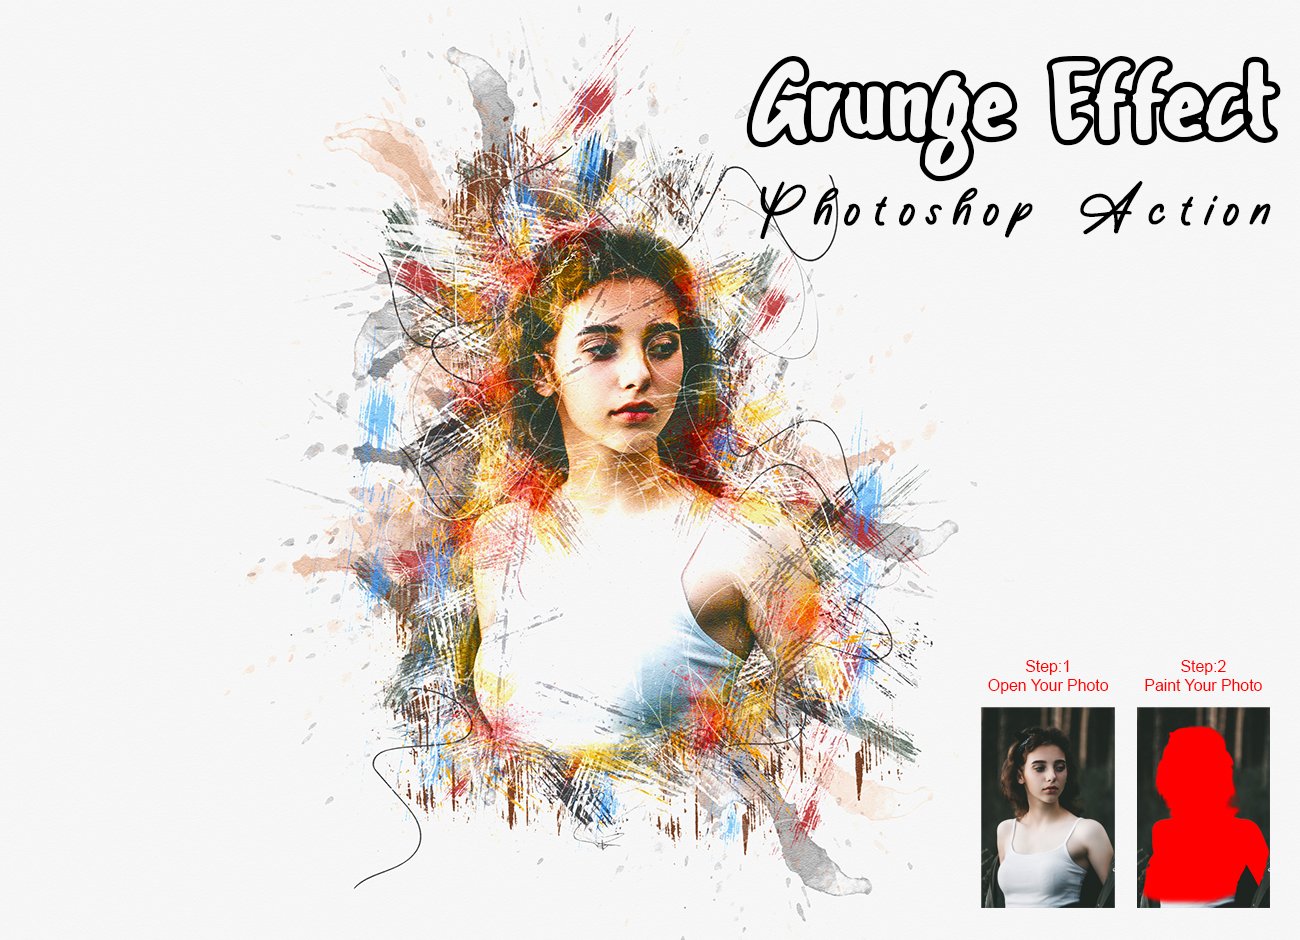 Grunge Effect Photoshop Actioncover image.